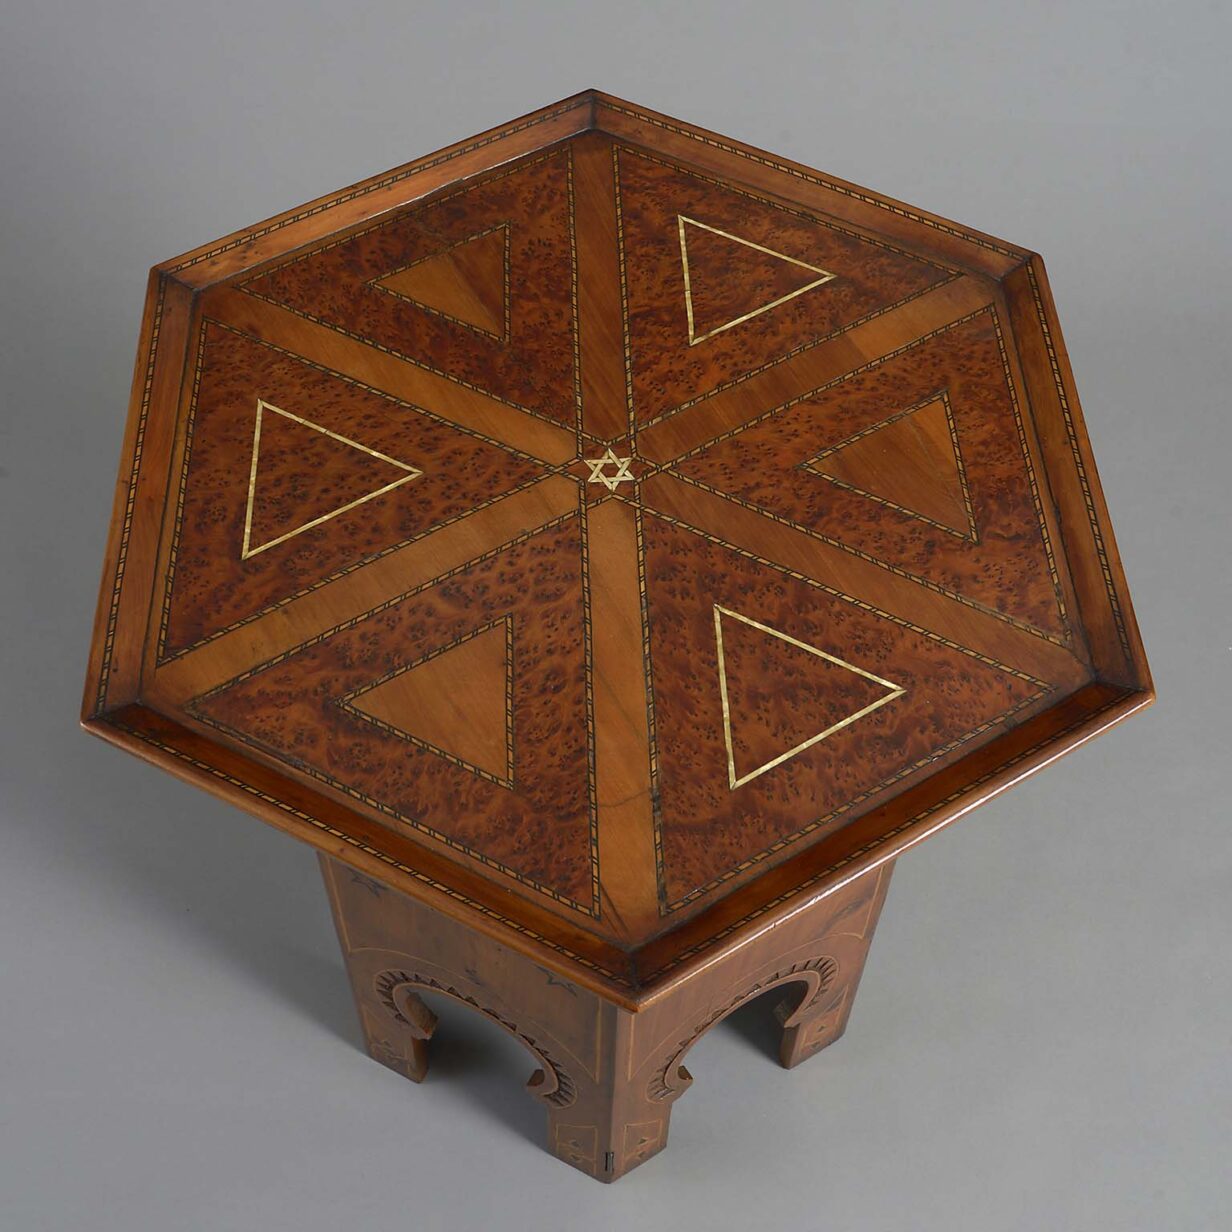 19th century inlaid yew wood low table